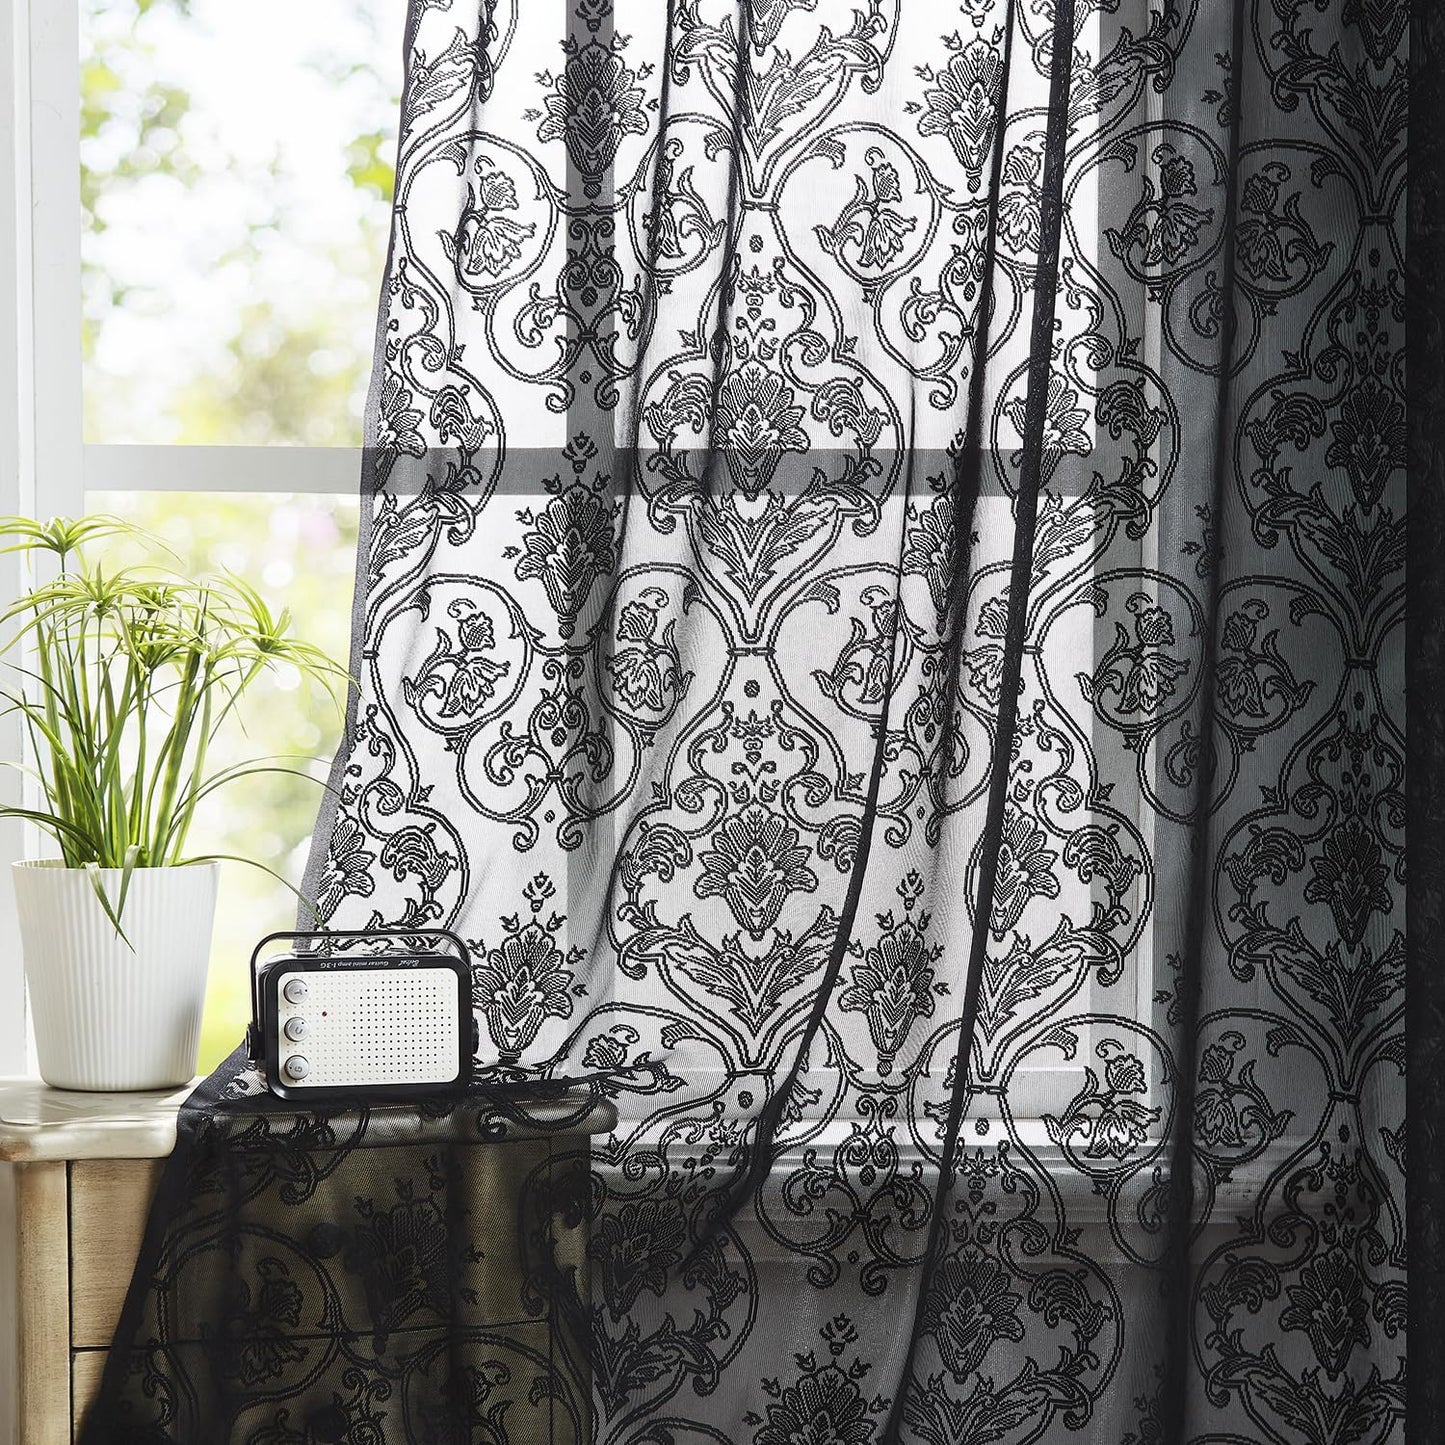 Treatmentex Black Sheer Lace Curtains for Bedroom Living Room Studio 84Inch Long Vintage Rose Floral Embroidered Semi Sheer Curtain Panels Privacy Leaf Sheer Drapes with Scalloped Edge 54" W 2Pcs 7Ft  Treatmentex Damask - Black 52"W X 63"L 2Pcs 